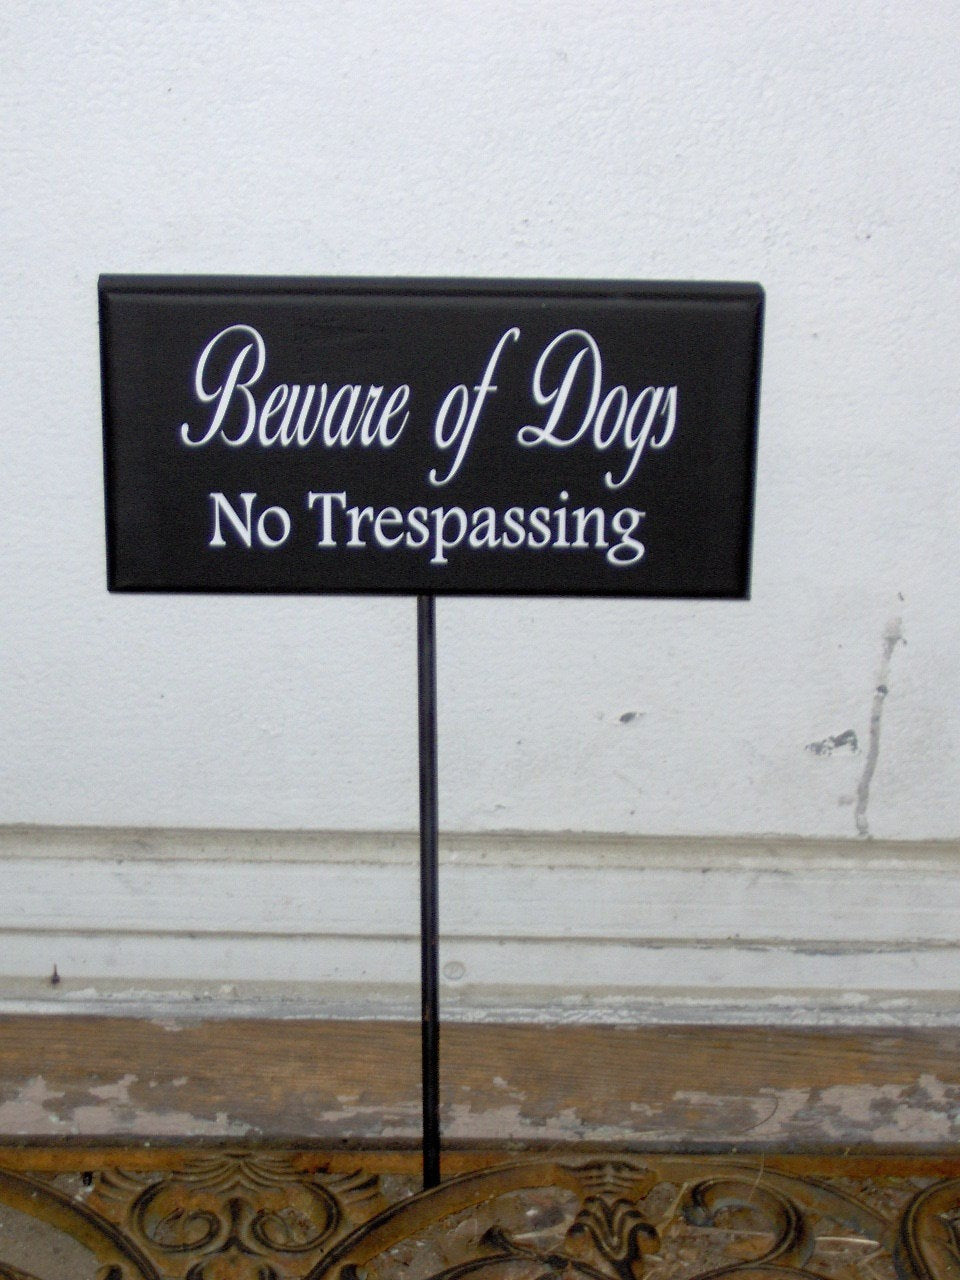 Beware Of Dogs No Trespassing Wood Vinyl Yard Stake Sign Home Yard Sign Yard Decor Porch Sign Garden Security Pet Supplies Guard Dog Sign - Heartfelt Giver